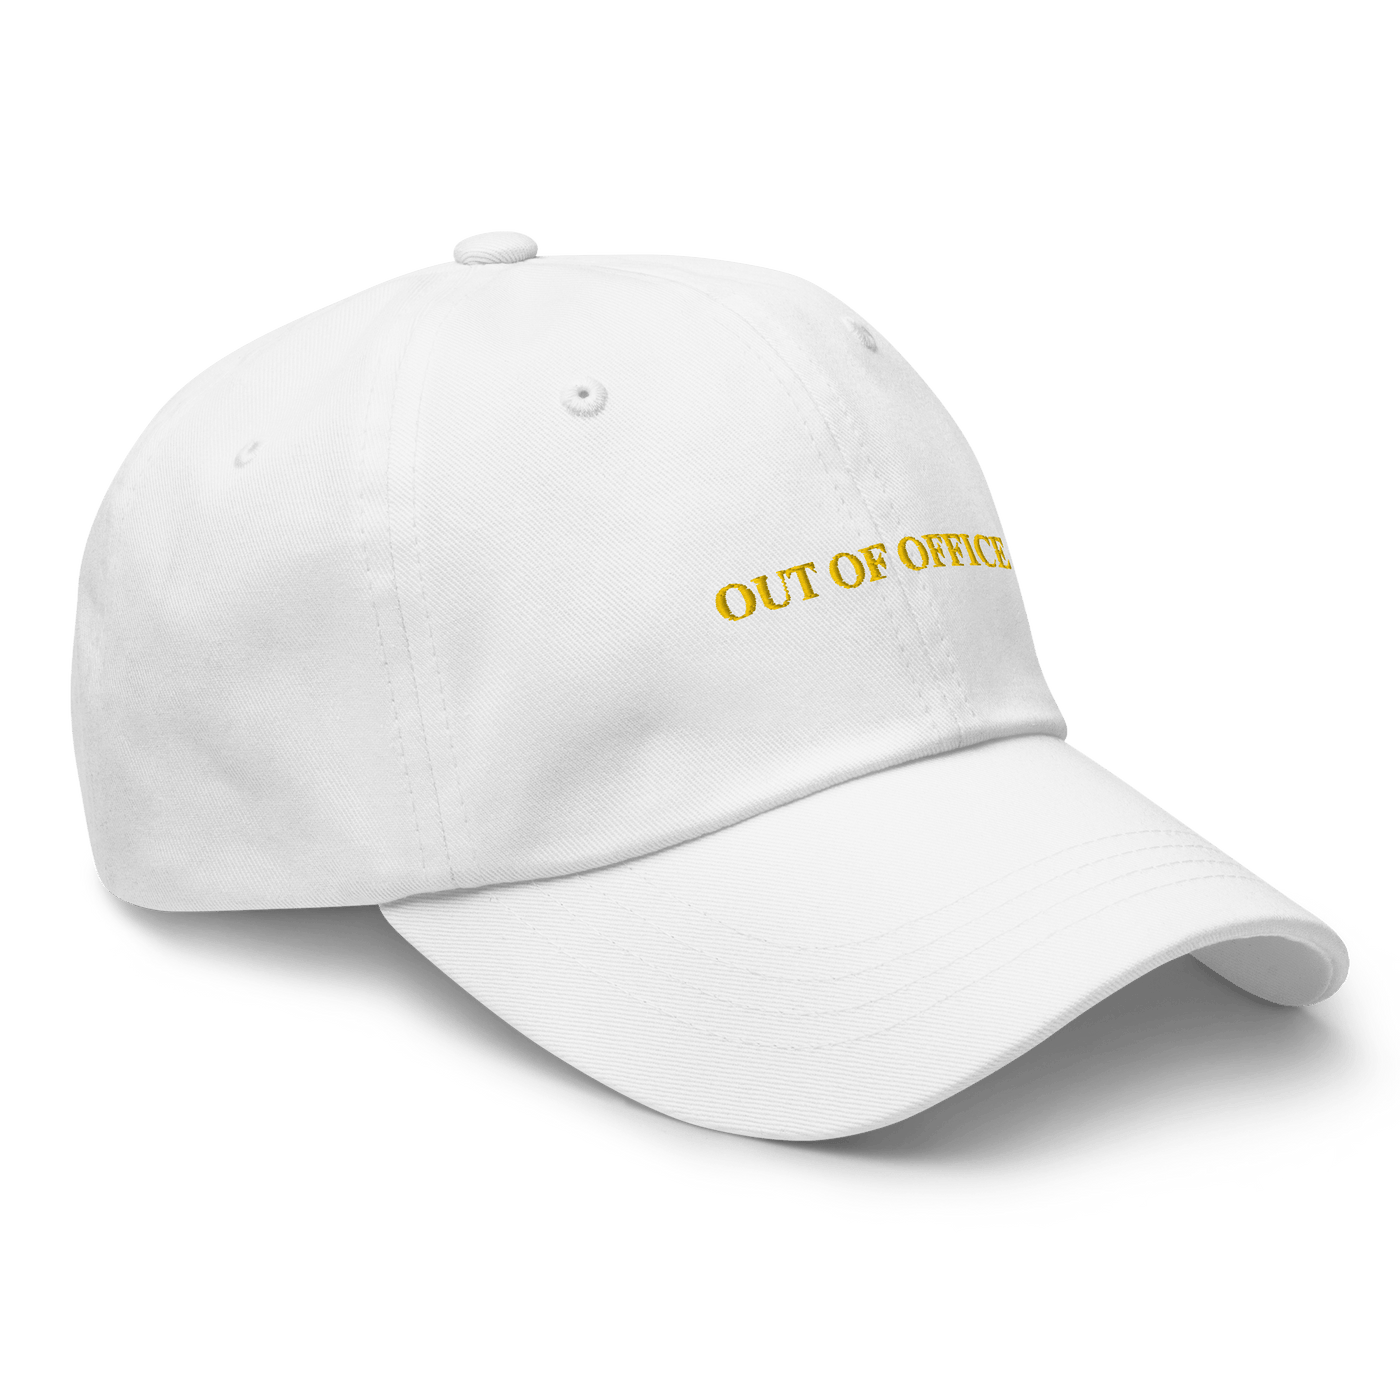 OUT OF OFFICE Dad hat - White - - Just Another Cap Store